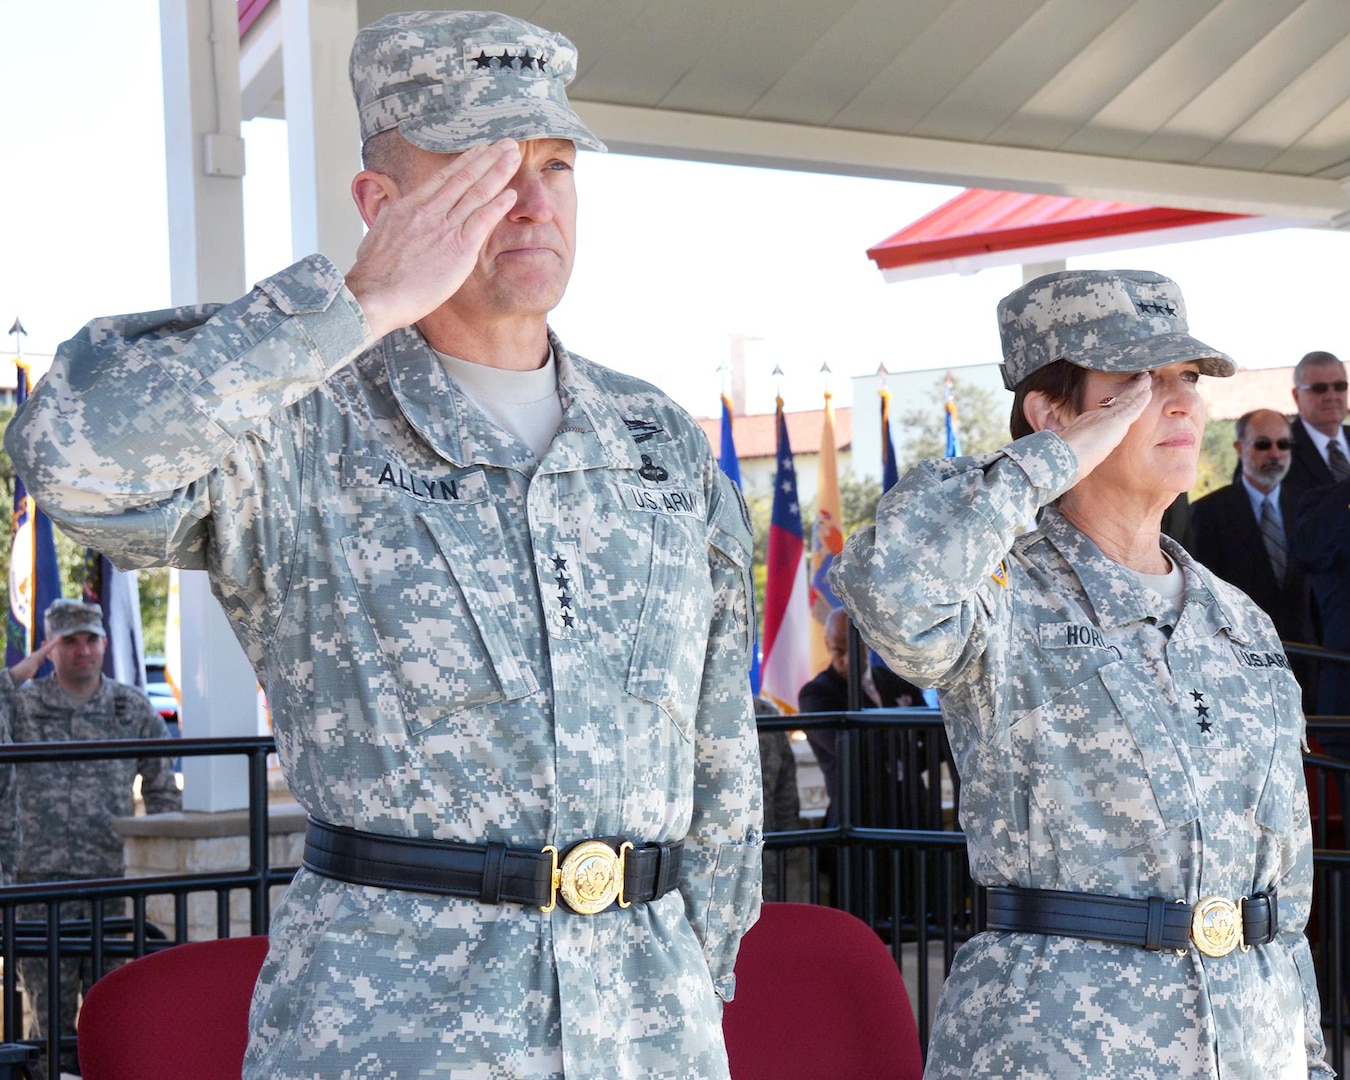 Army Vice Chief of Staff Gen. Daniel B. Allyn (left) and outgoing Army Surgeon General and Commanding General of the U.S. Army Medical Command Lt. Gen. Patricia D. Horoho salute during her relinquishment of command ceremony at MacArthur Parade Field on Fort Sam Houston Dec. 3.
